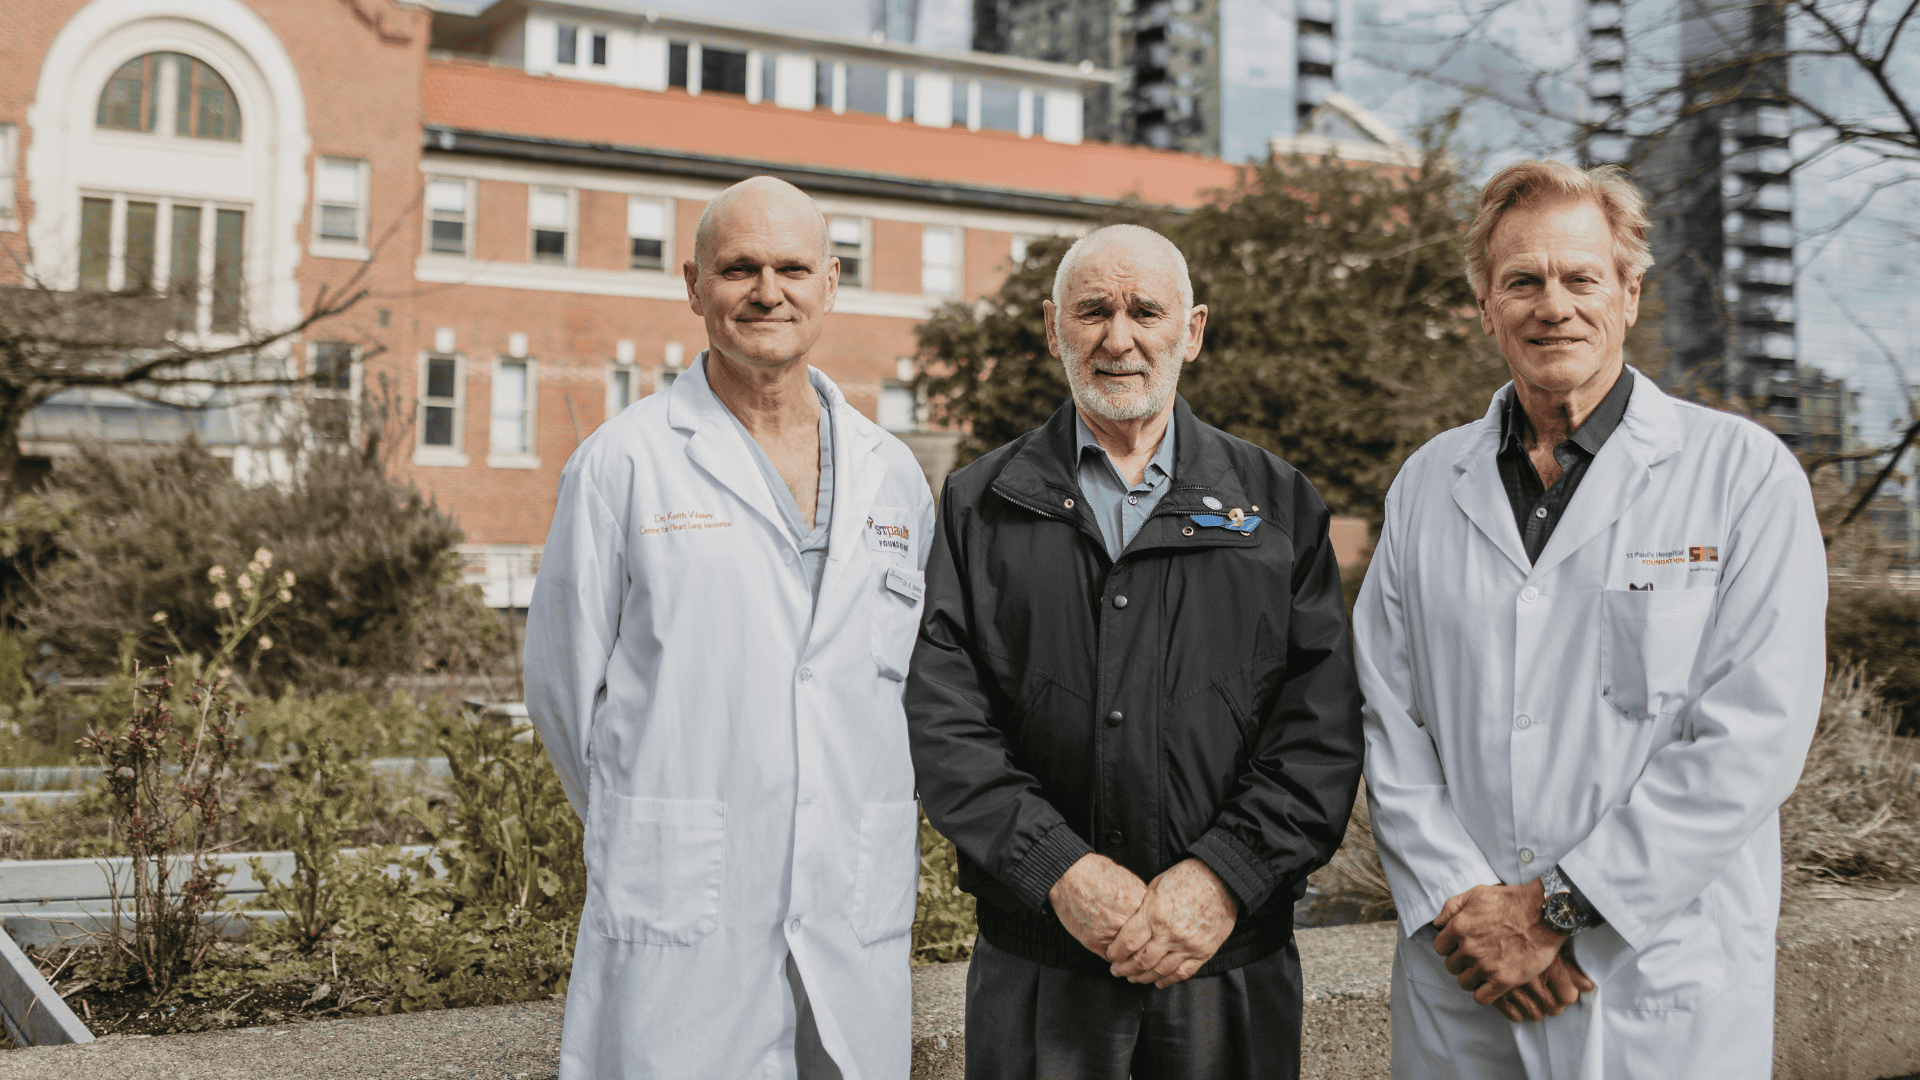 Dr. Keith Walley, principal investigator at the Centre for Heart Lung Innovation (HLI) and associate director of ICU at St. Paul’s Hospital; James Stitchman, sepsis survivor; and Dr. Jim Russell, principal investigator at HLI.